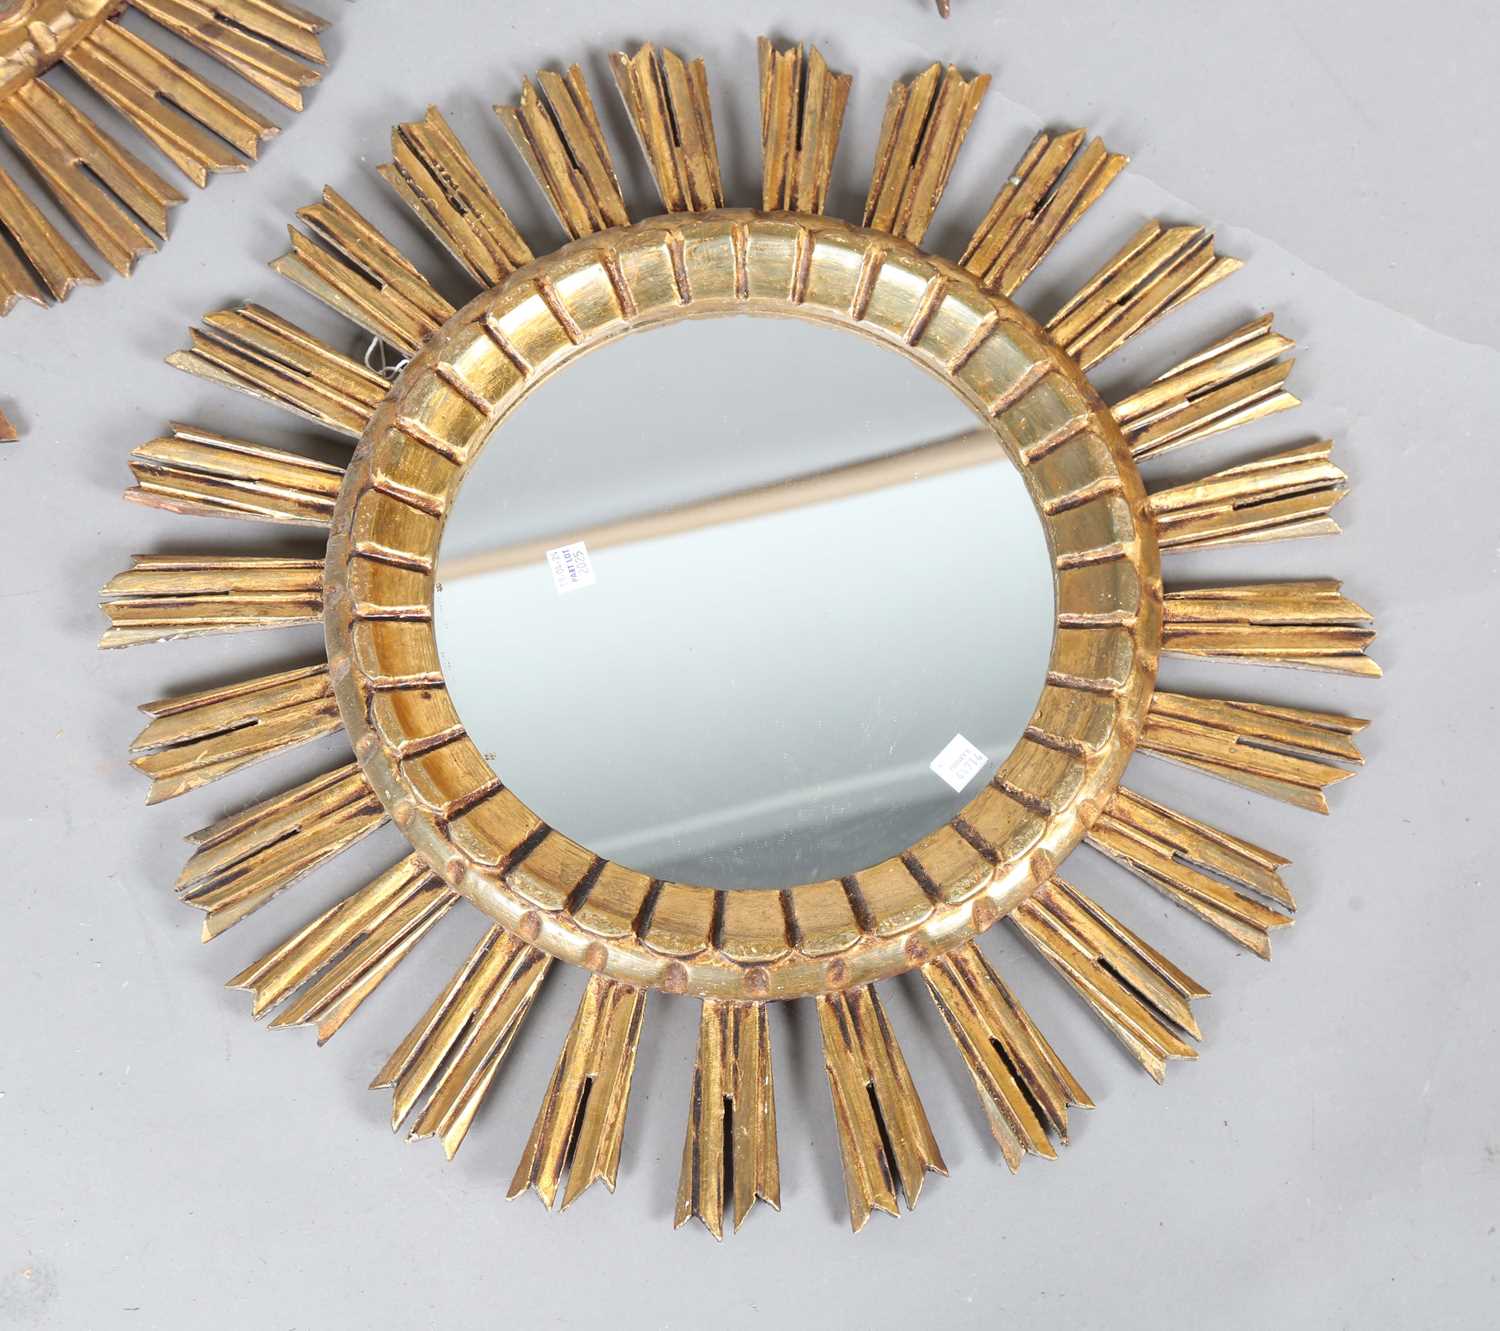 A 20th century Continental giltwood circular wall mirror with sunburst frame, diameter 61cm, - Image 7 of 10